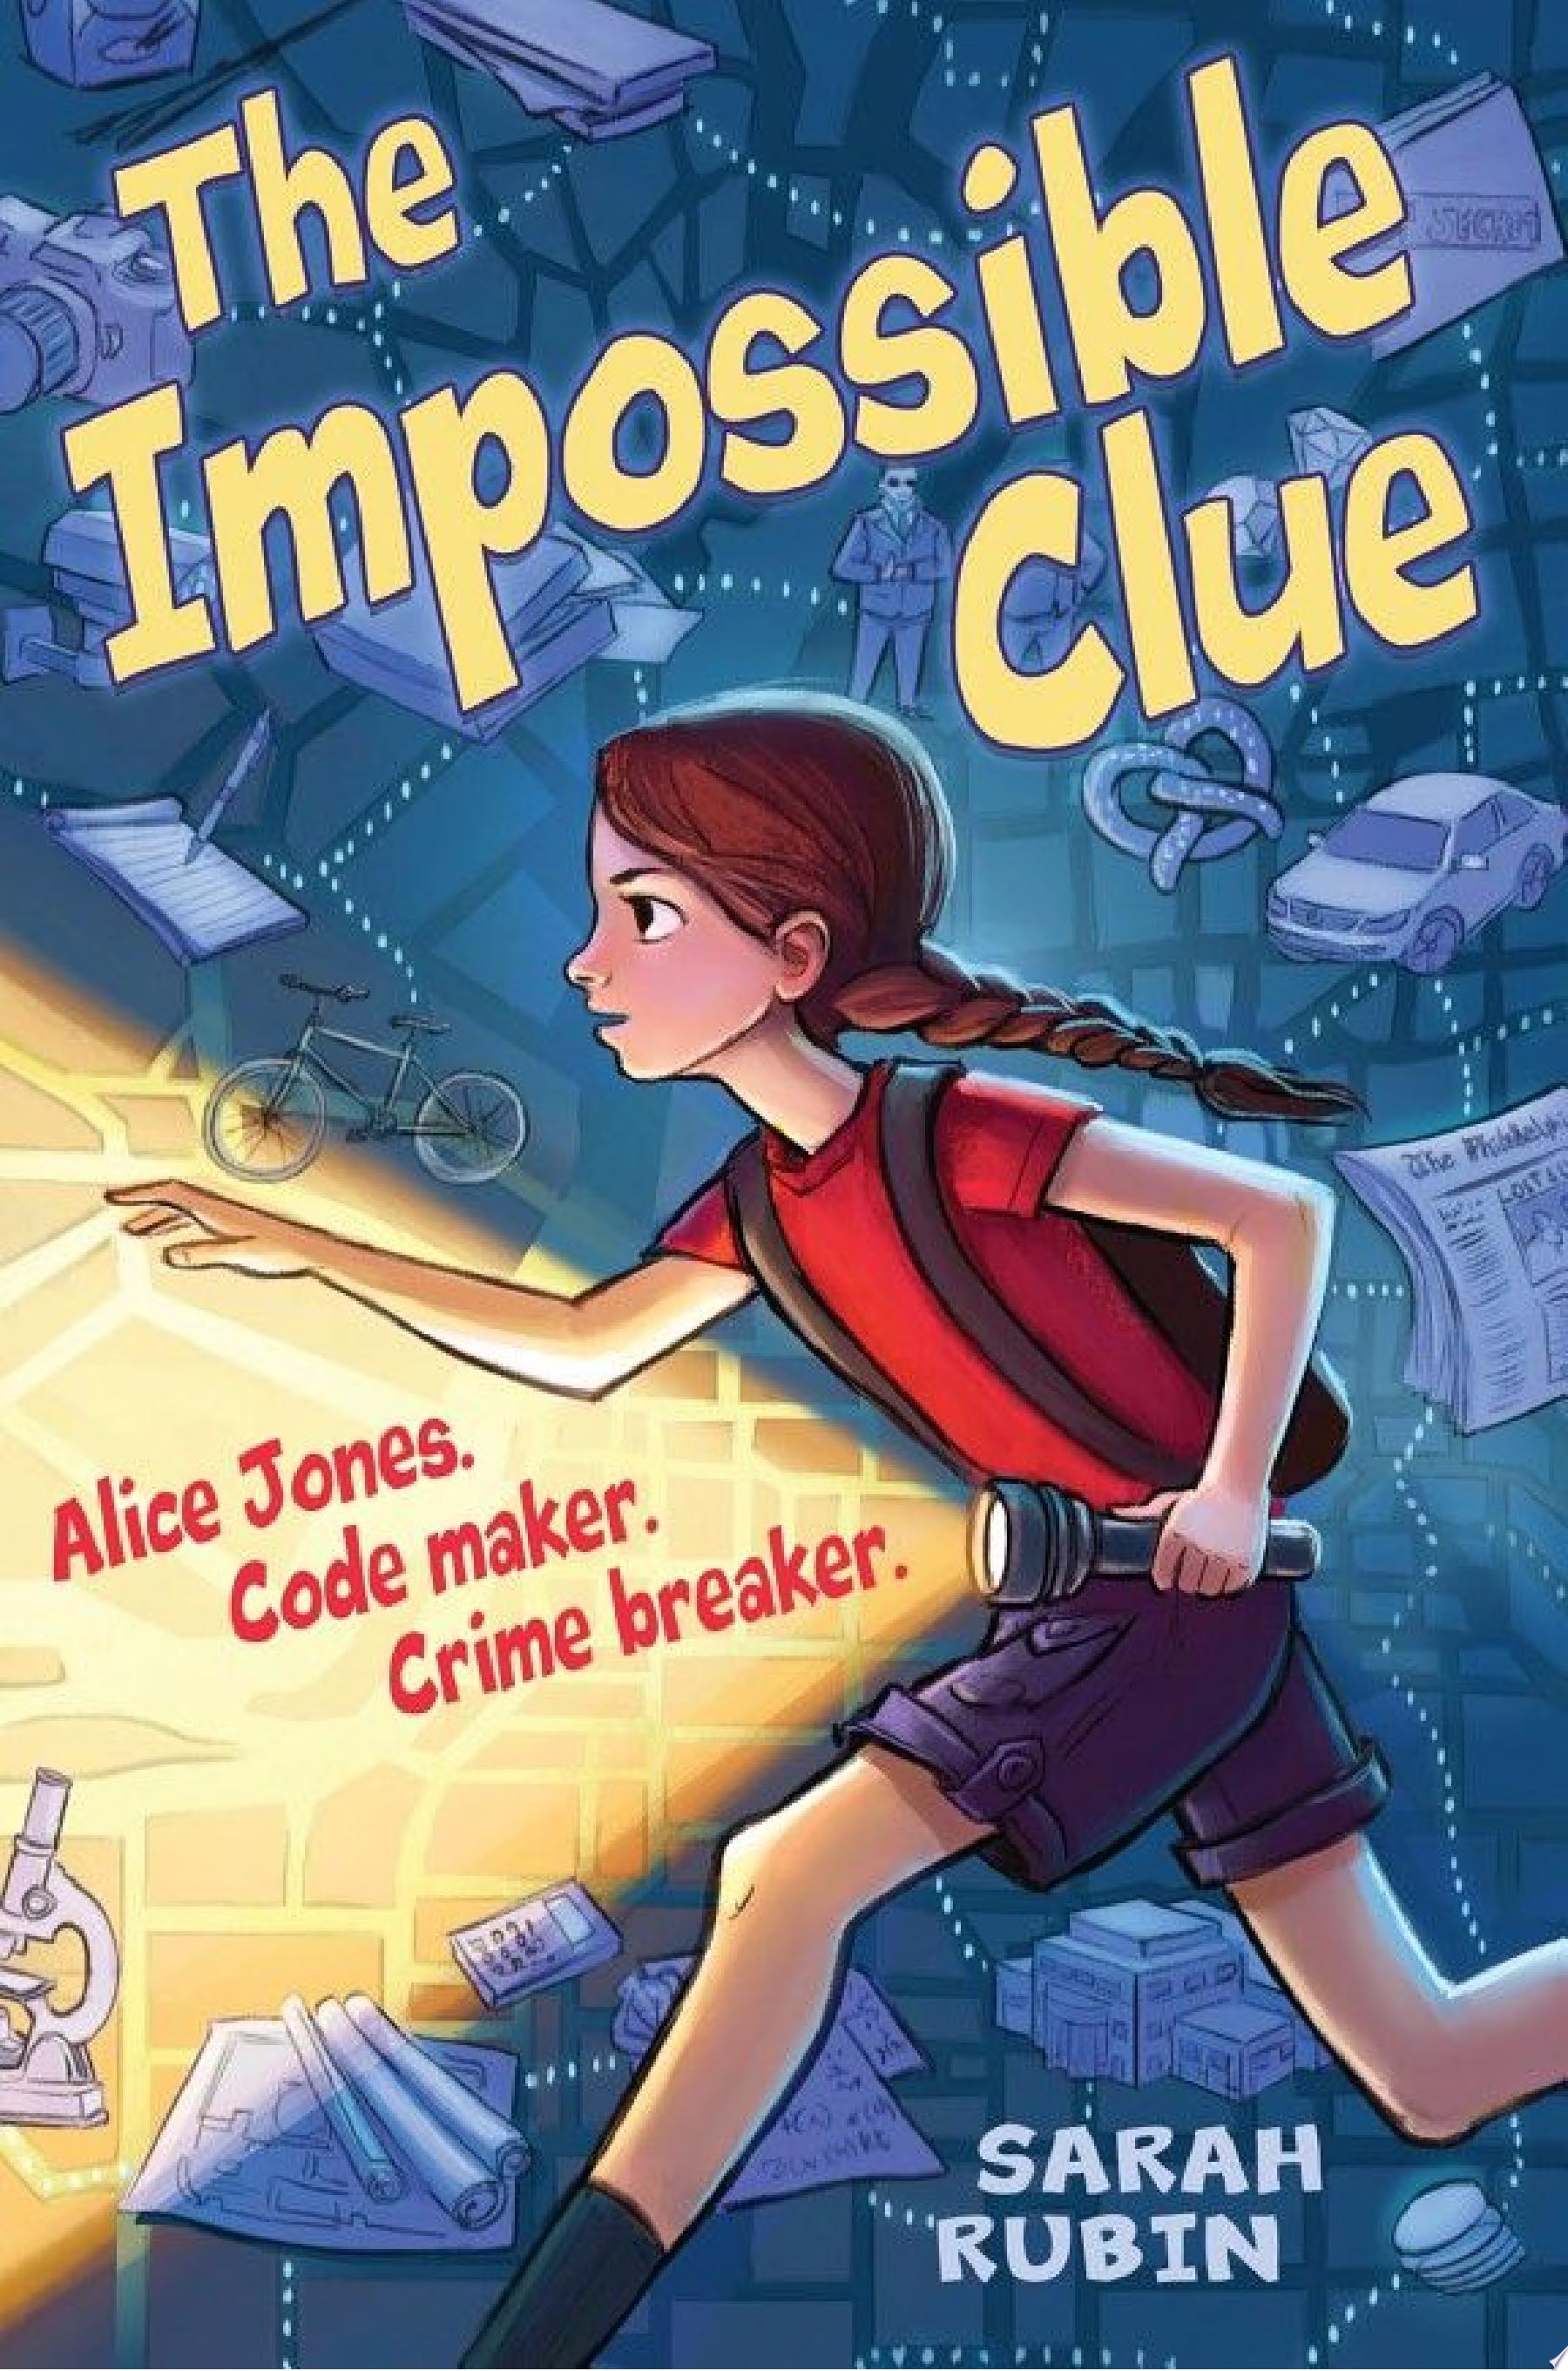 Image for "The Impossible Clue"